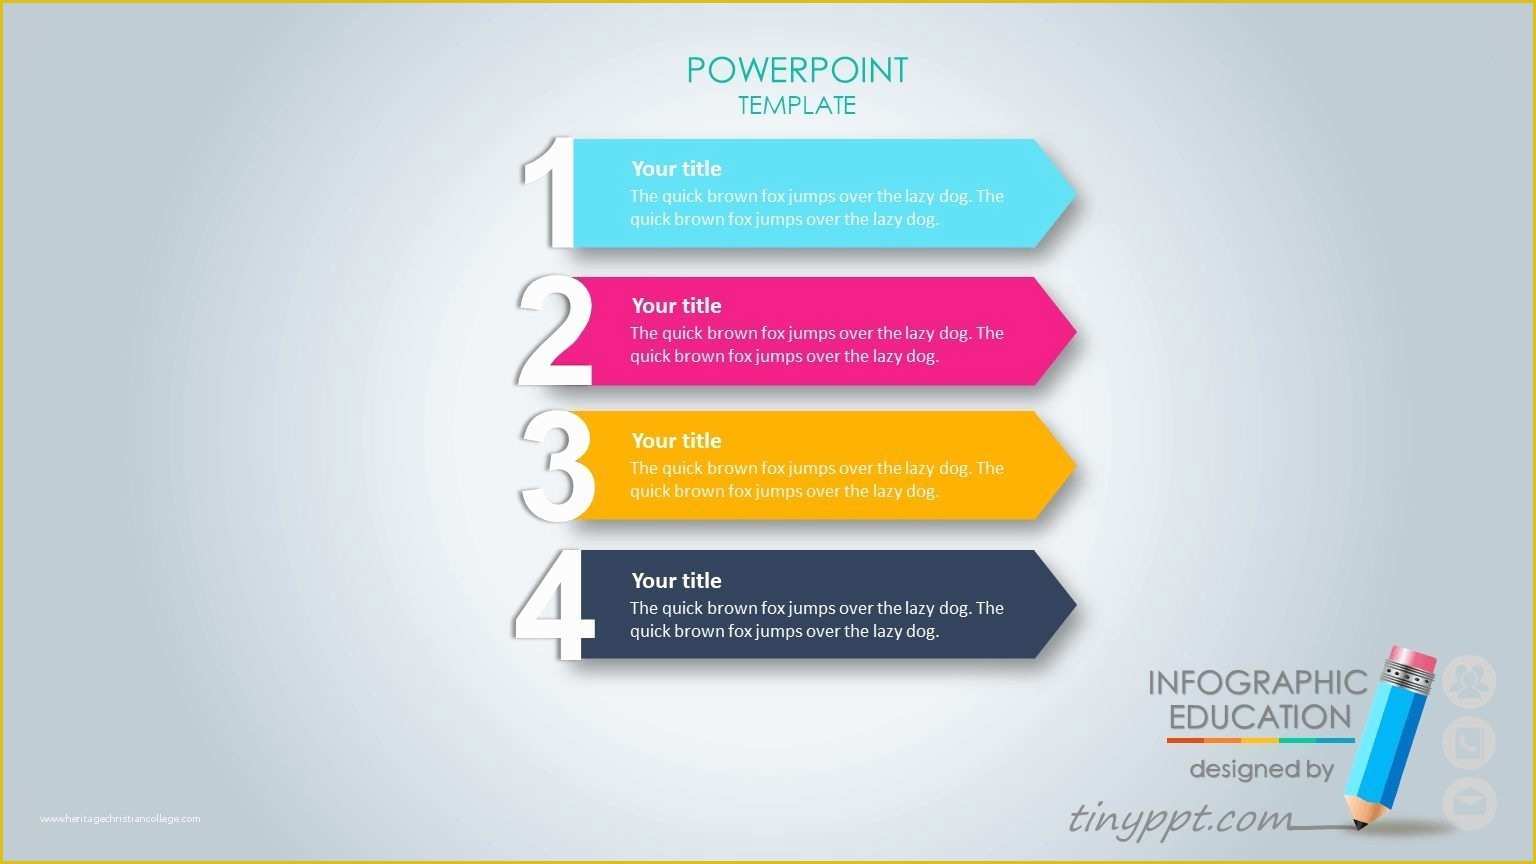 Free Powerpoint Templates 2018 Of Animated Ppt Templates Free Download for Project